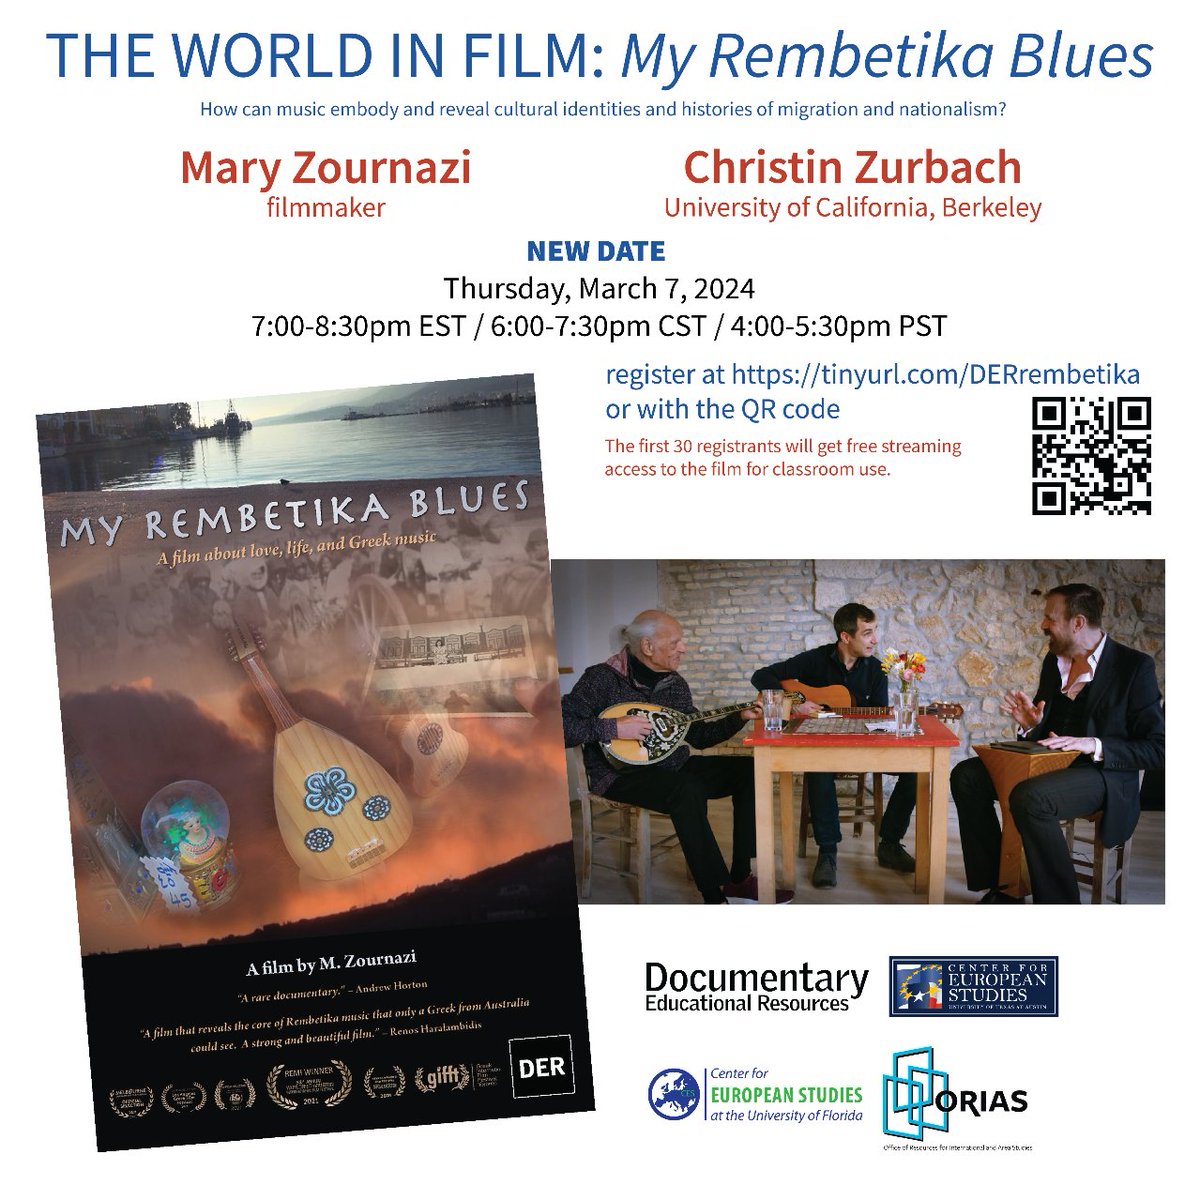 Educators, don't forget to register for My Rembetika Blues film screening & discussion with the filmmaker, Mary Zournazi. register at tinyurl.com/DERrembetika. The first 30 registrants will get free streaming access to the film for classroom use! @DocuEd @ORIASUCB @UFCES